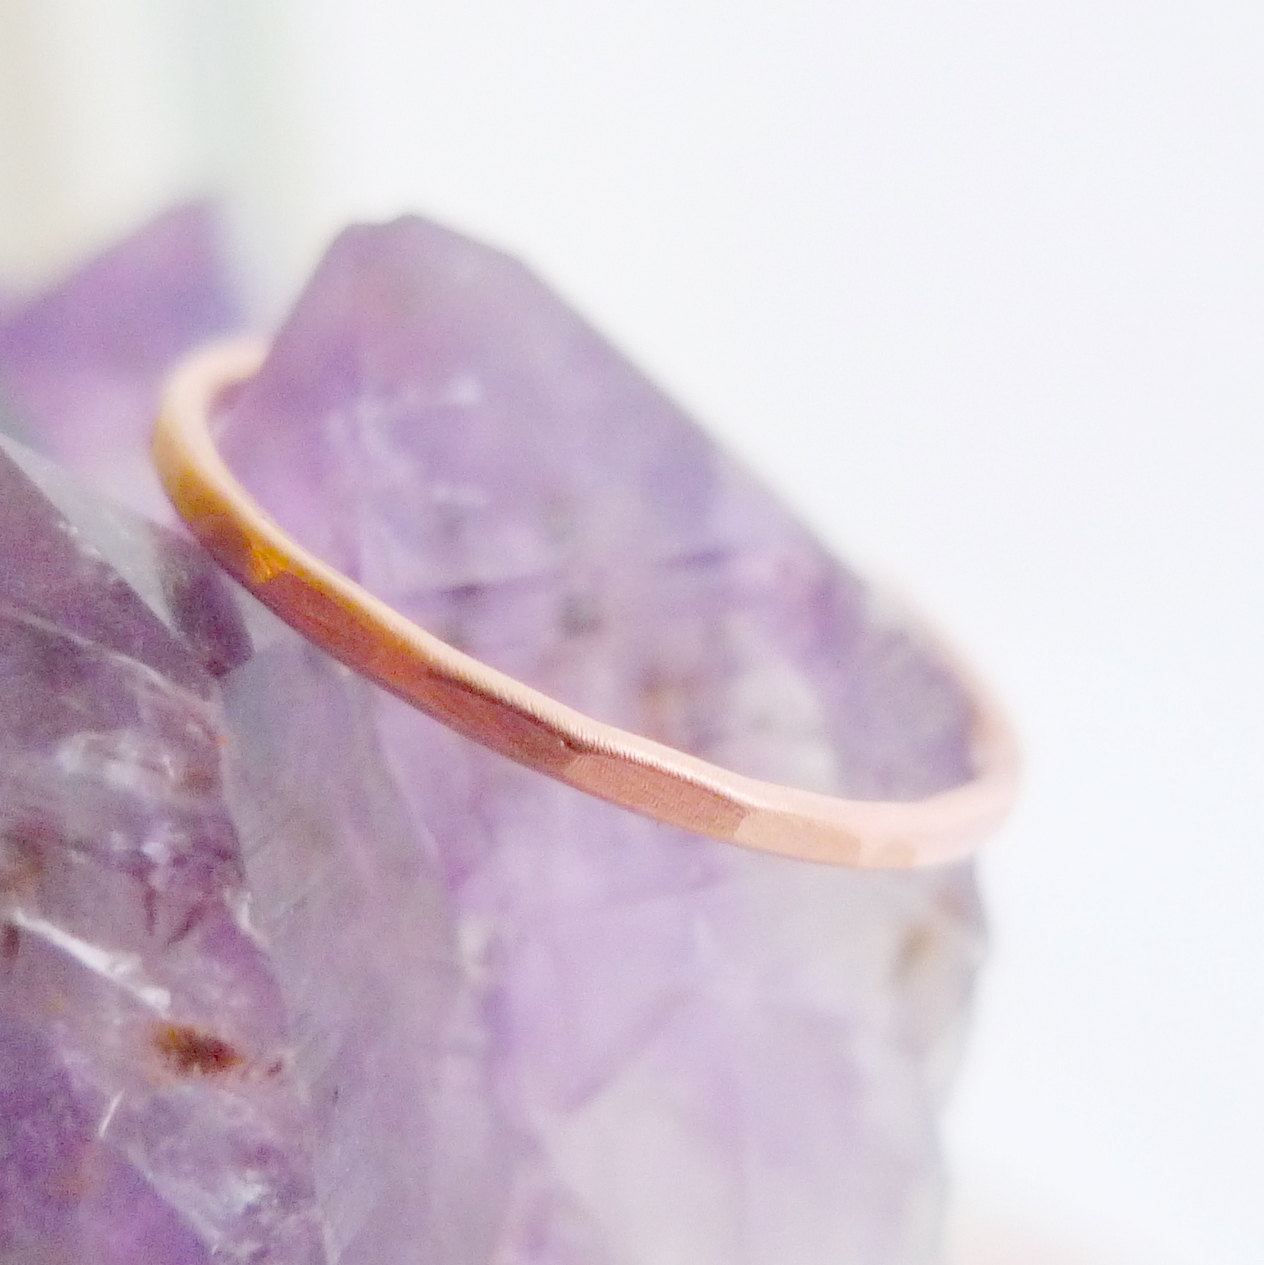 One Copper Ring... A Single Thin Band To Wear Alone Or Add To Your Stacking Rings Collection